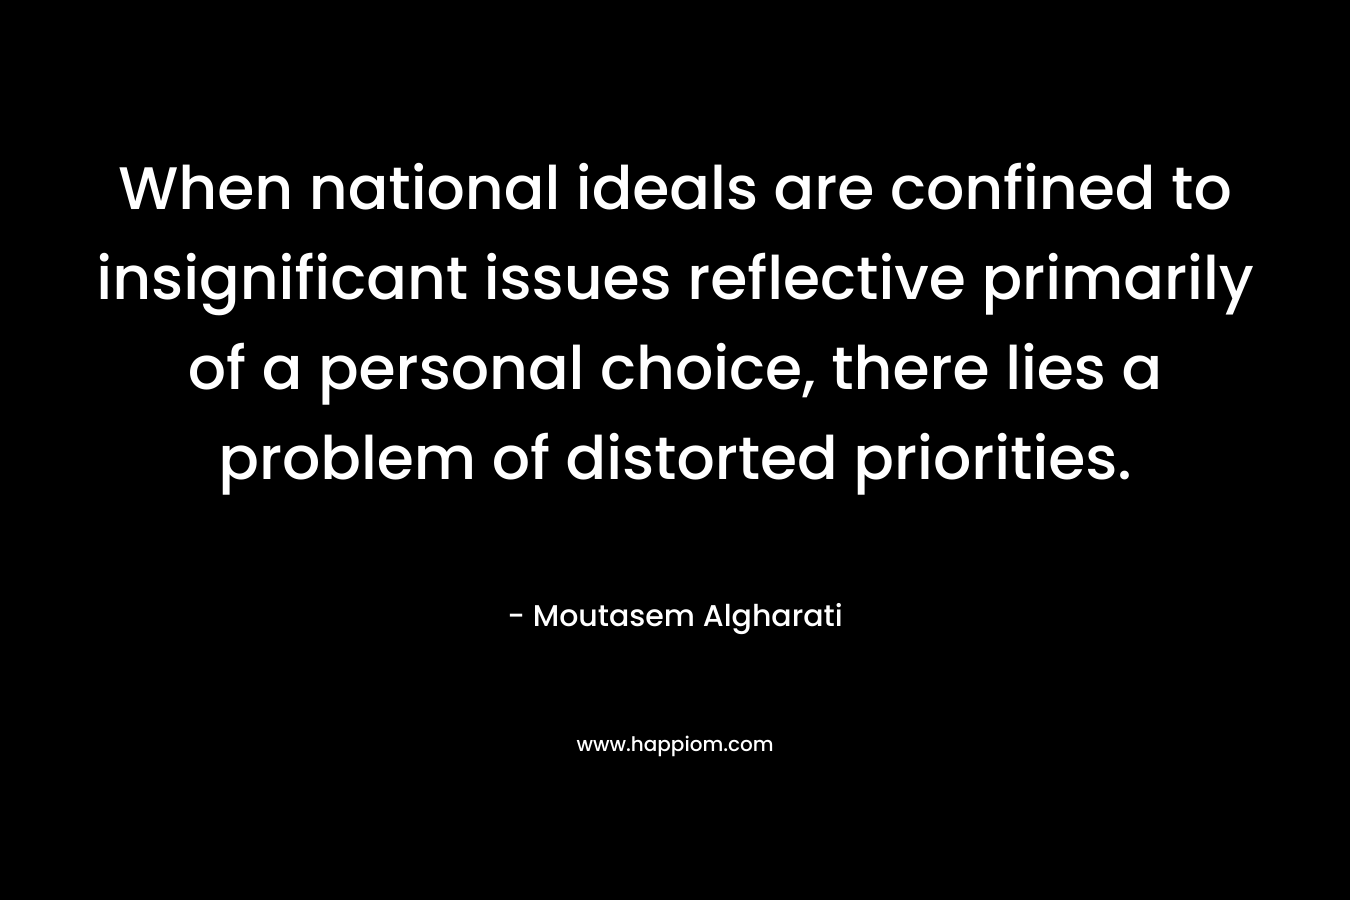 When national ideals are confined to insignificant issues reflective primarily of a personal choice, there lies a problem of distorted priorities. – Moutasem Algharati